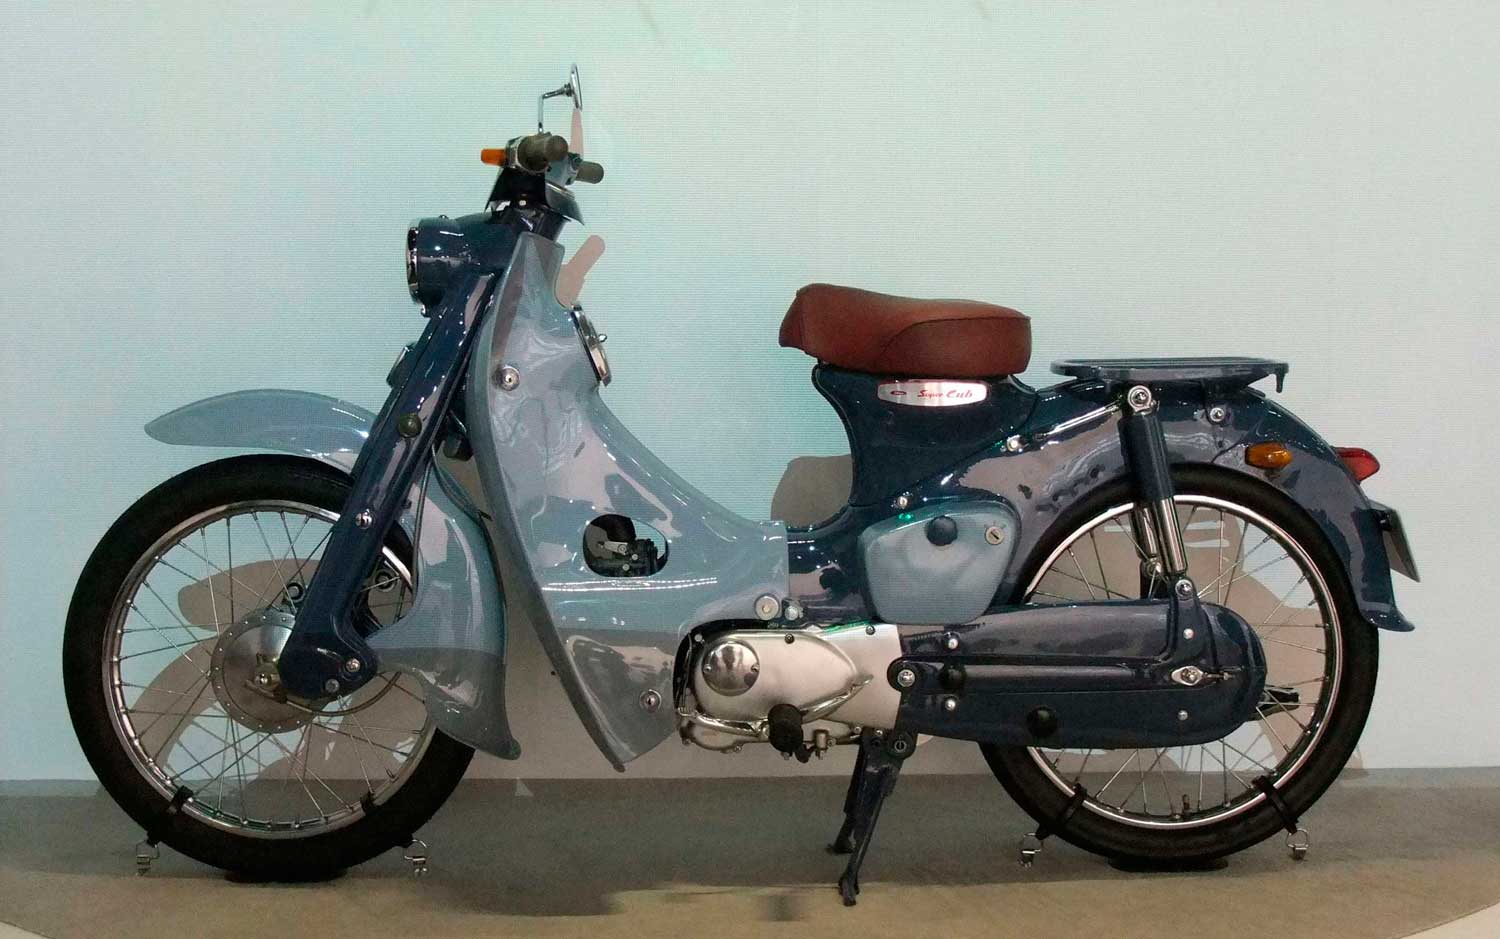 The Super Cub – the most popular motorcycle in the world!